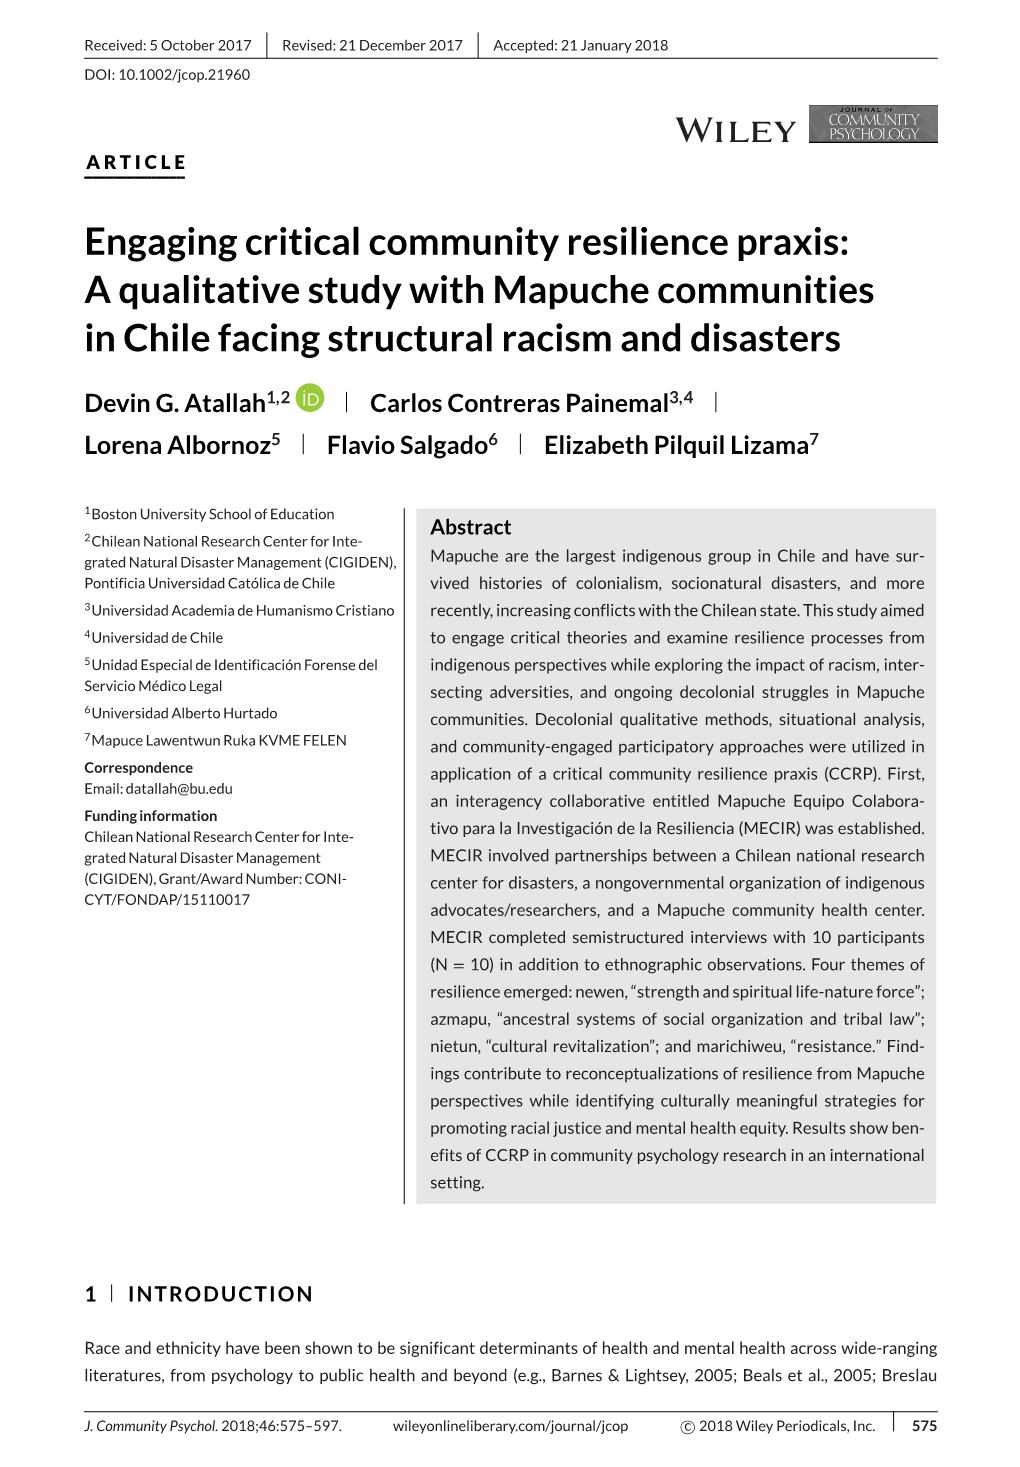 Engaging Critical Community Resilience Praxis: a Qualitative Study with Mapuche Communities in Chile Facing Structural Racism and Disasters